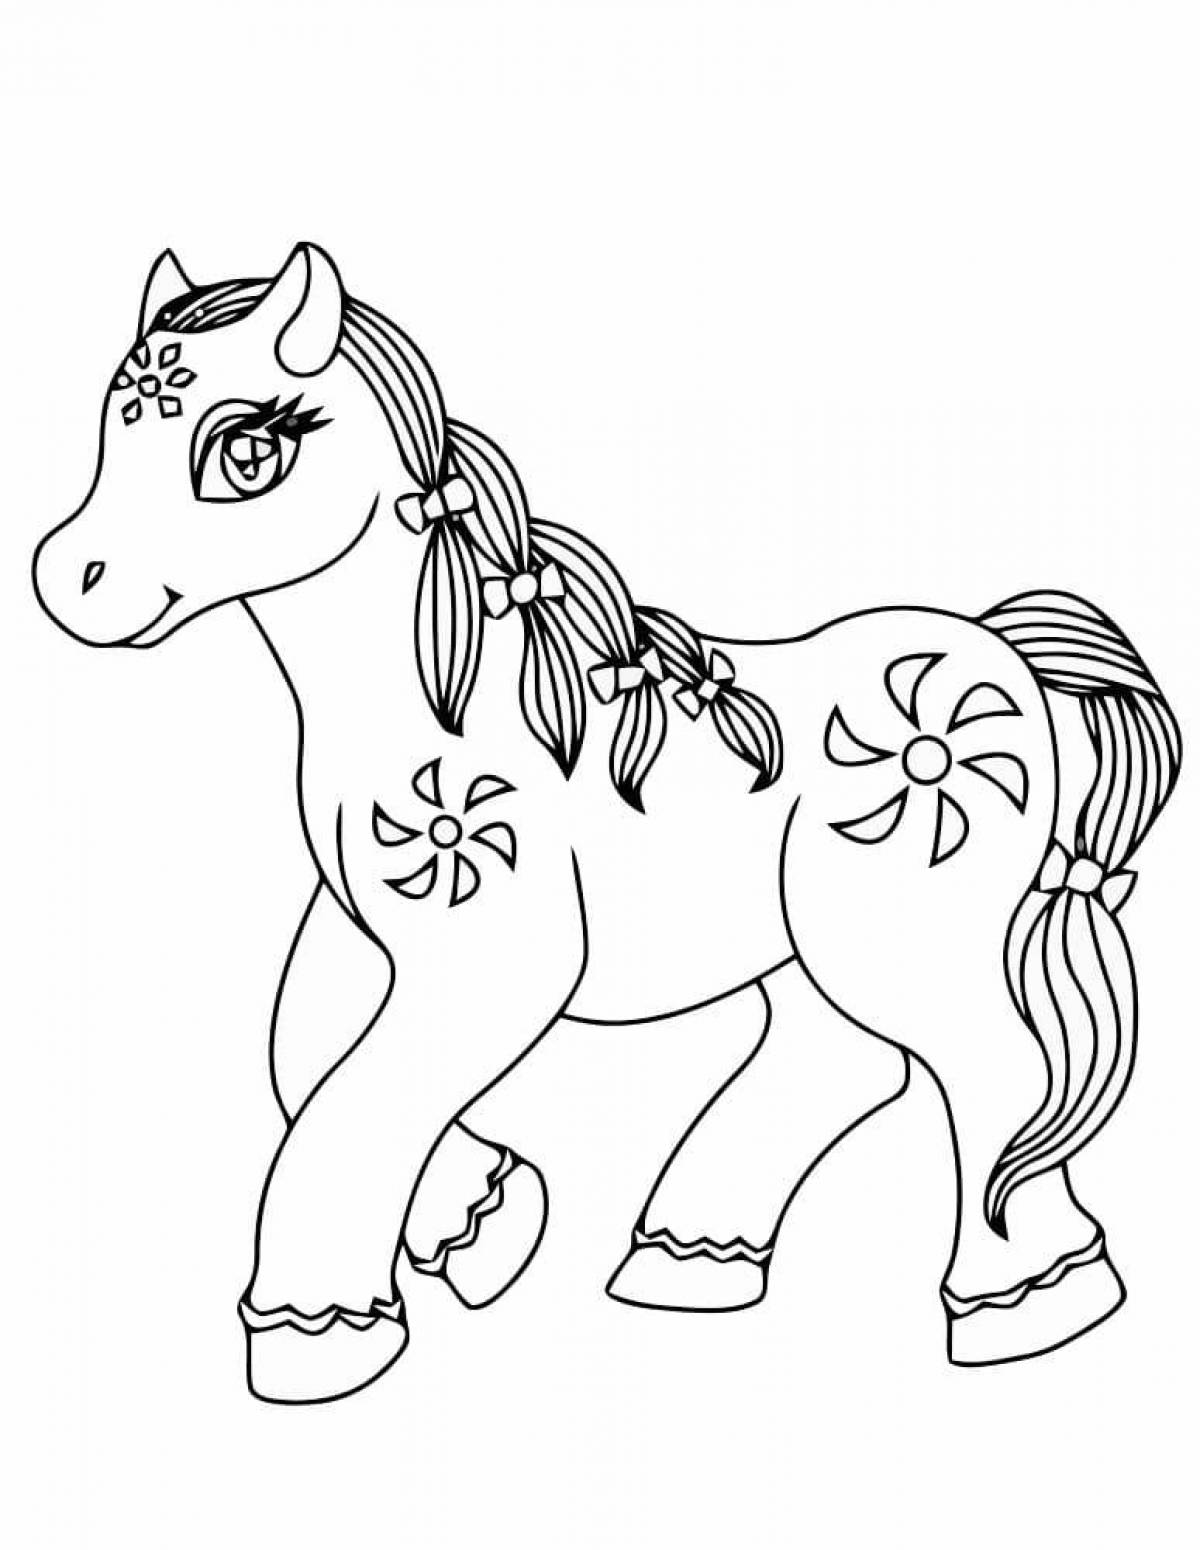 Adorable horse coloring page for 3-4 year olds